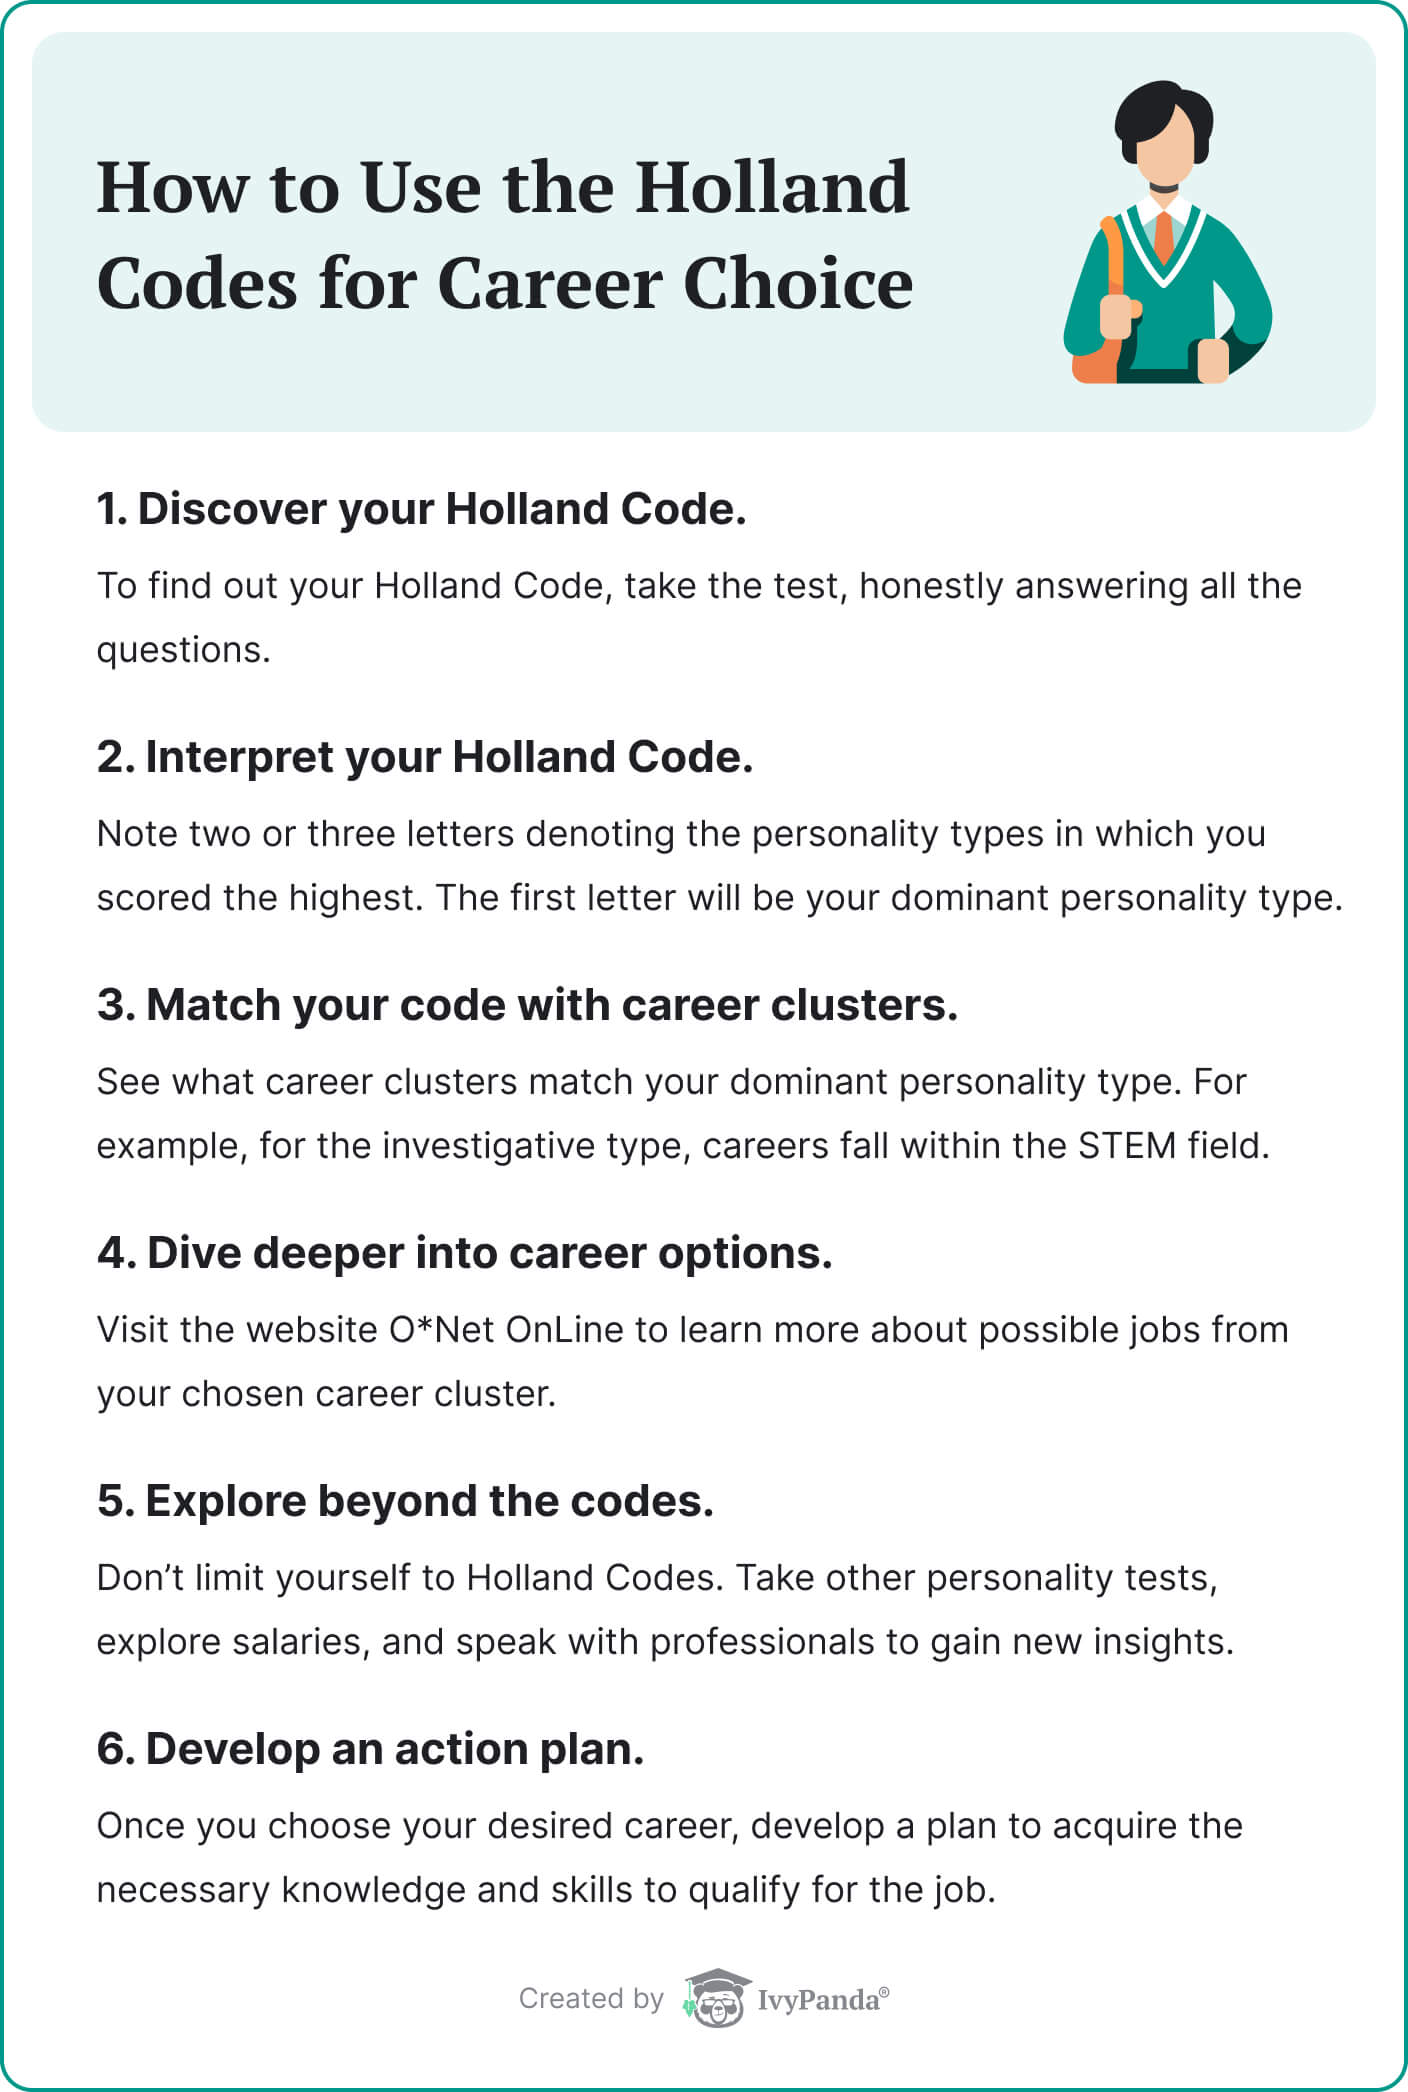 How to use the Holland codes for career choice.